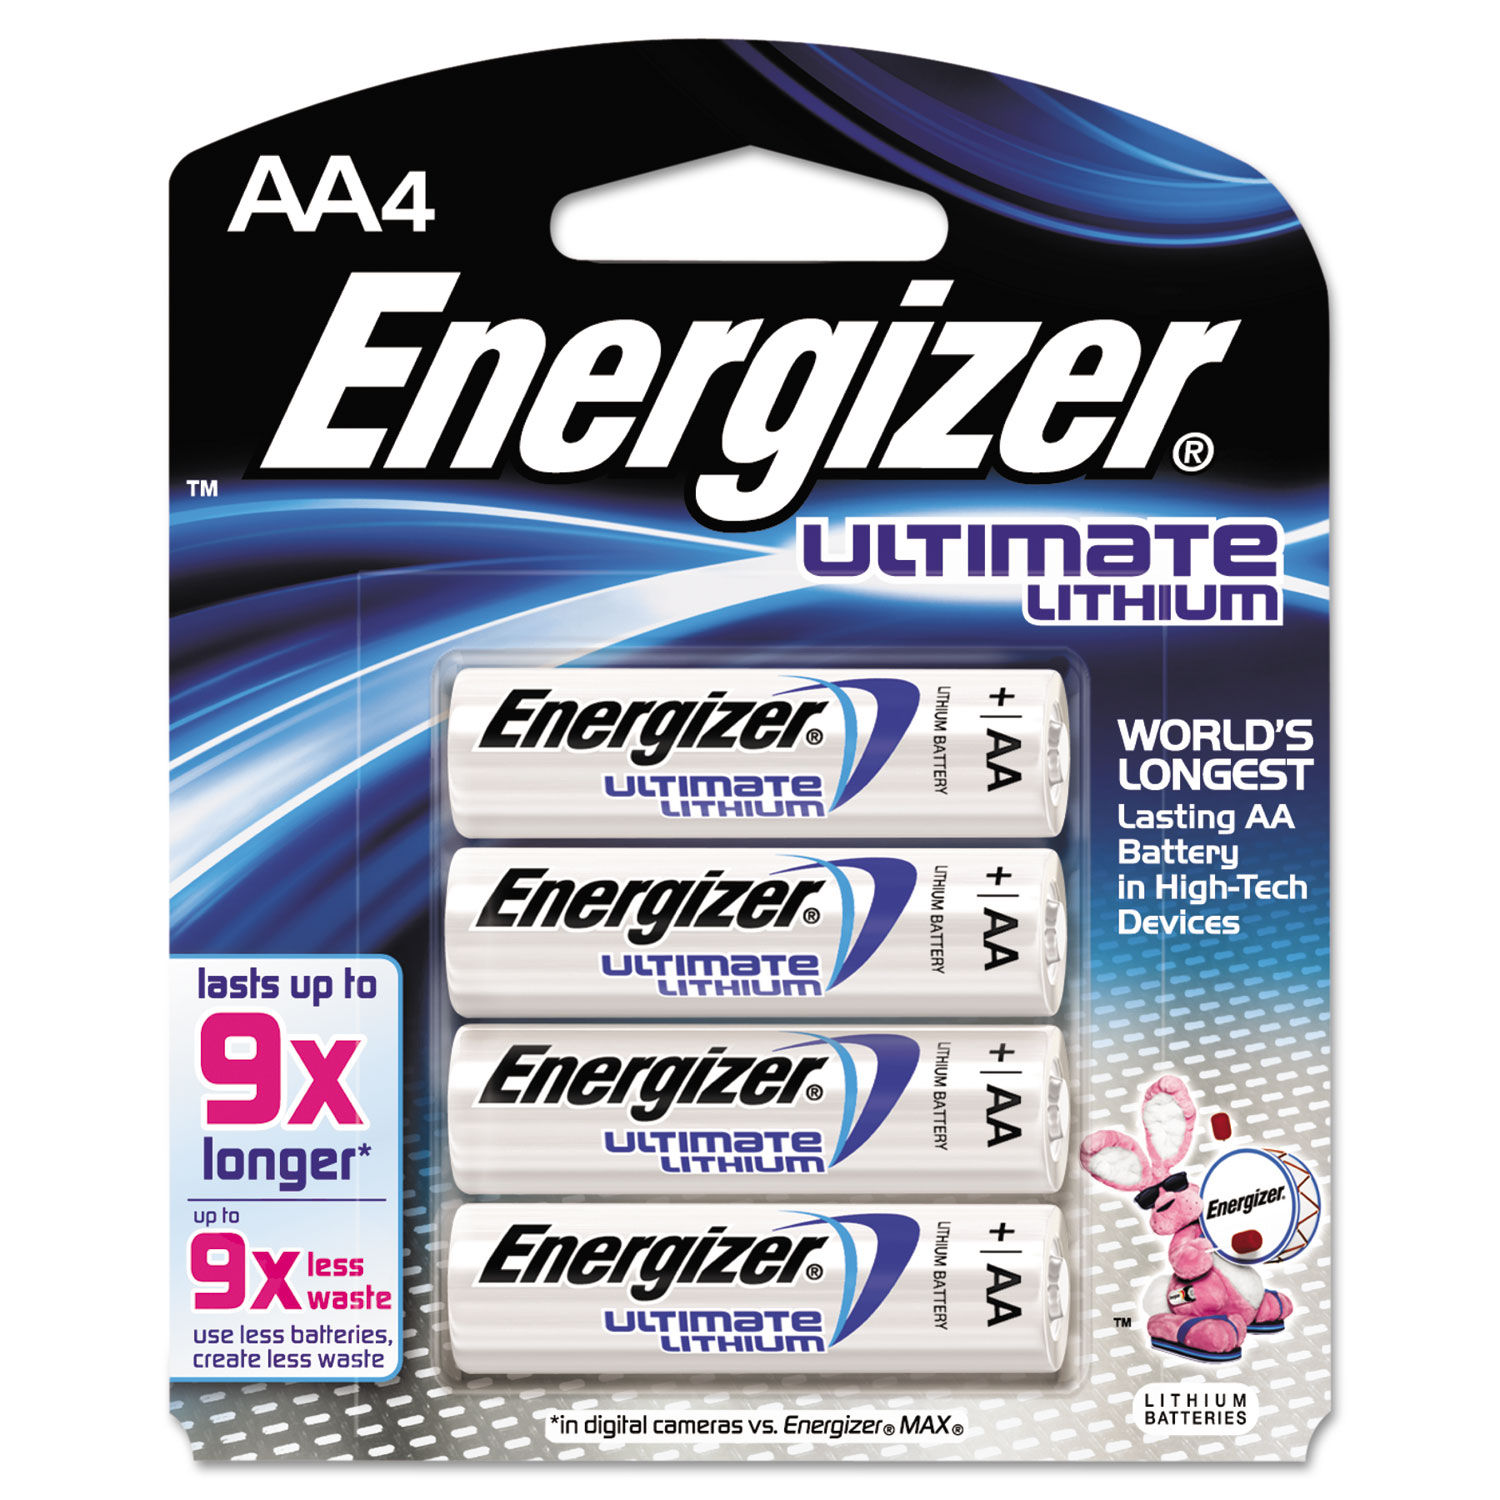 ULTIMATE LITHIUM AA BATTERIES 1.5V, 4/PACK